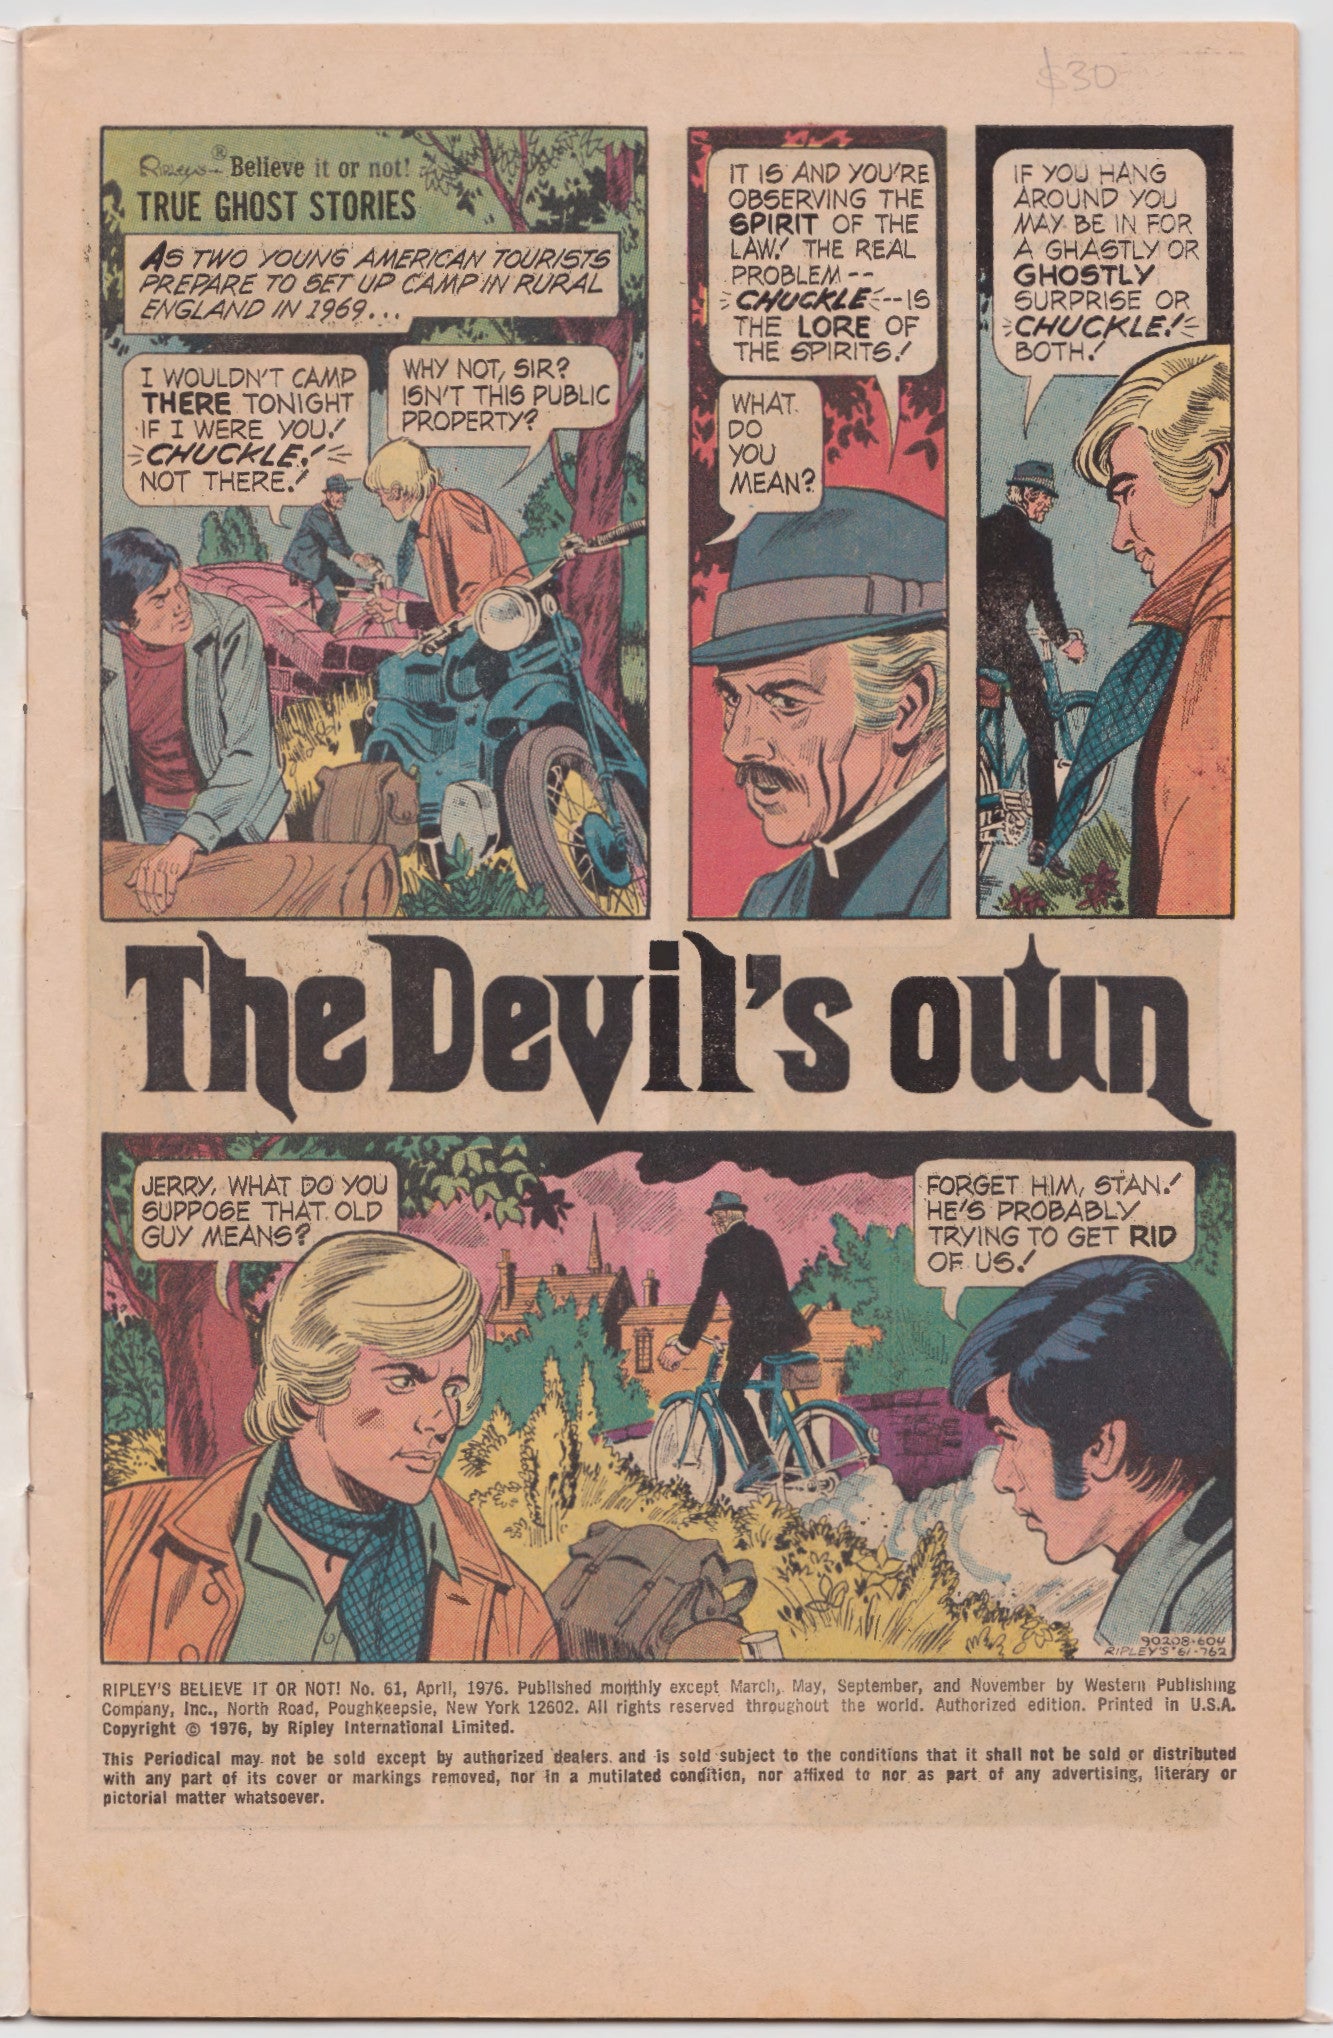 Ripleys Believe It Or Not Comic Book The Devils Own #61 April 1976